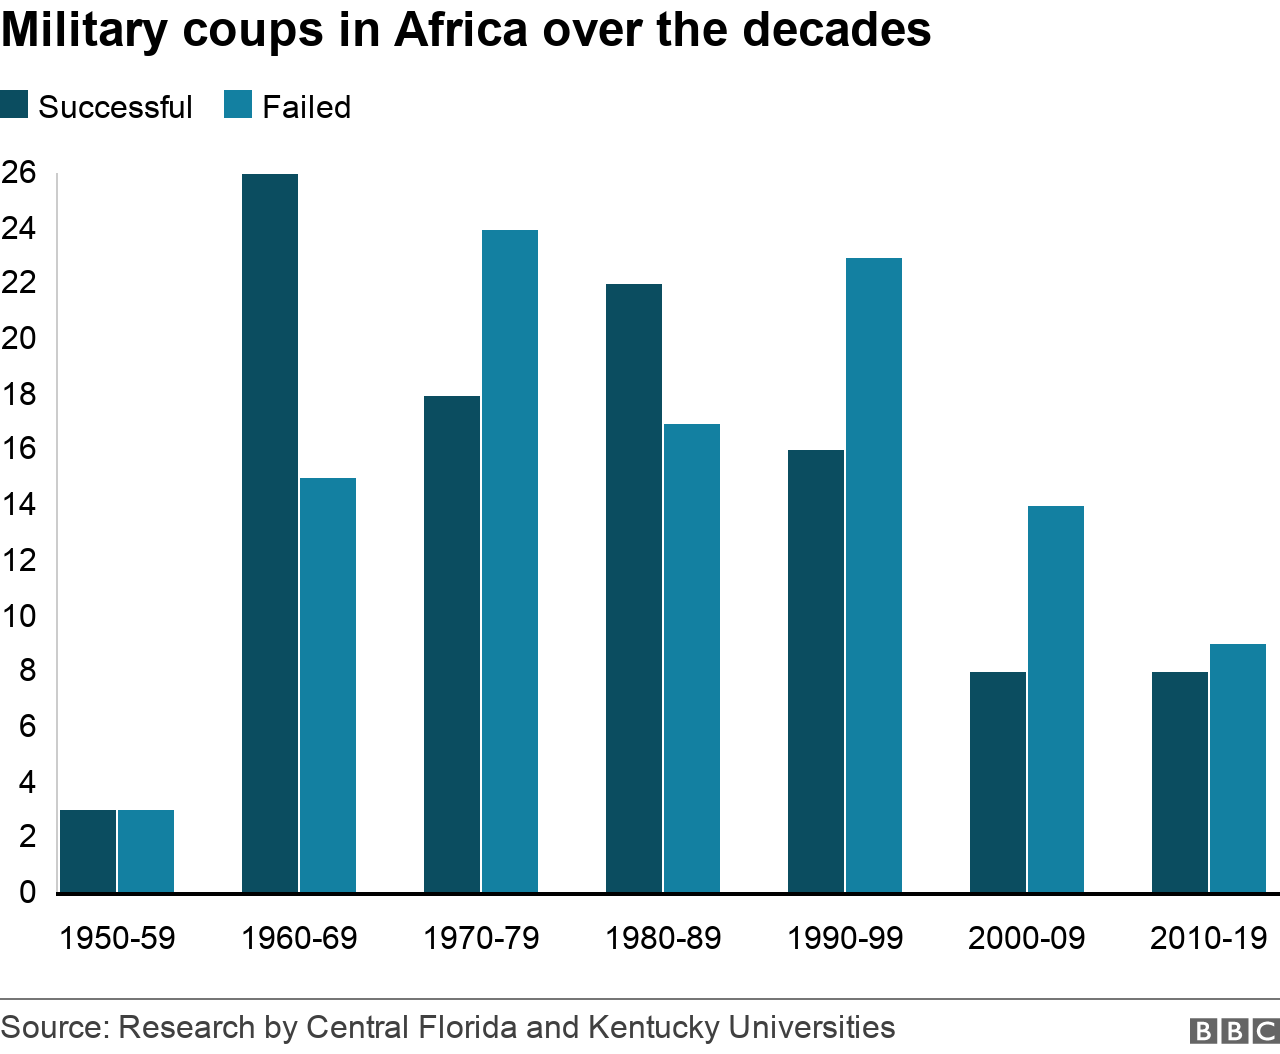 A graph showing successful and unsuccessful military coups in Africa